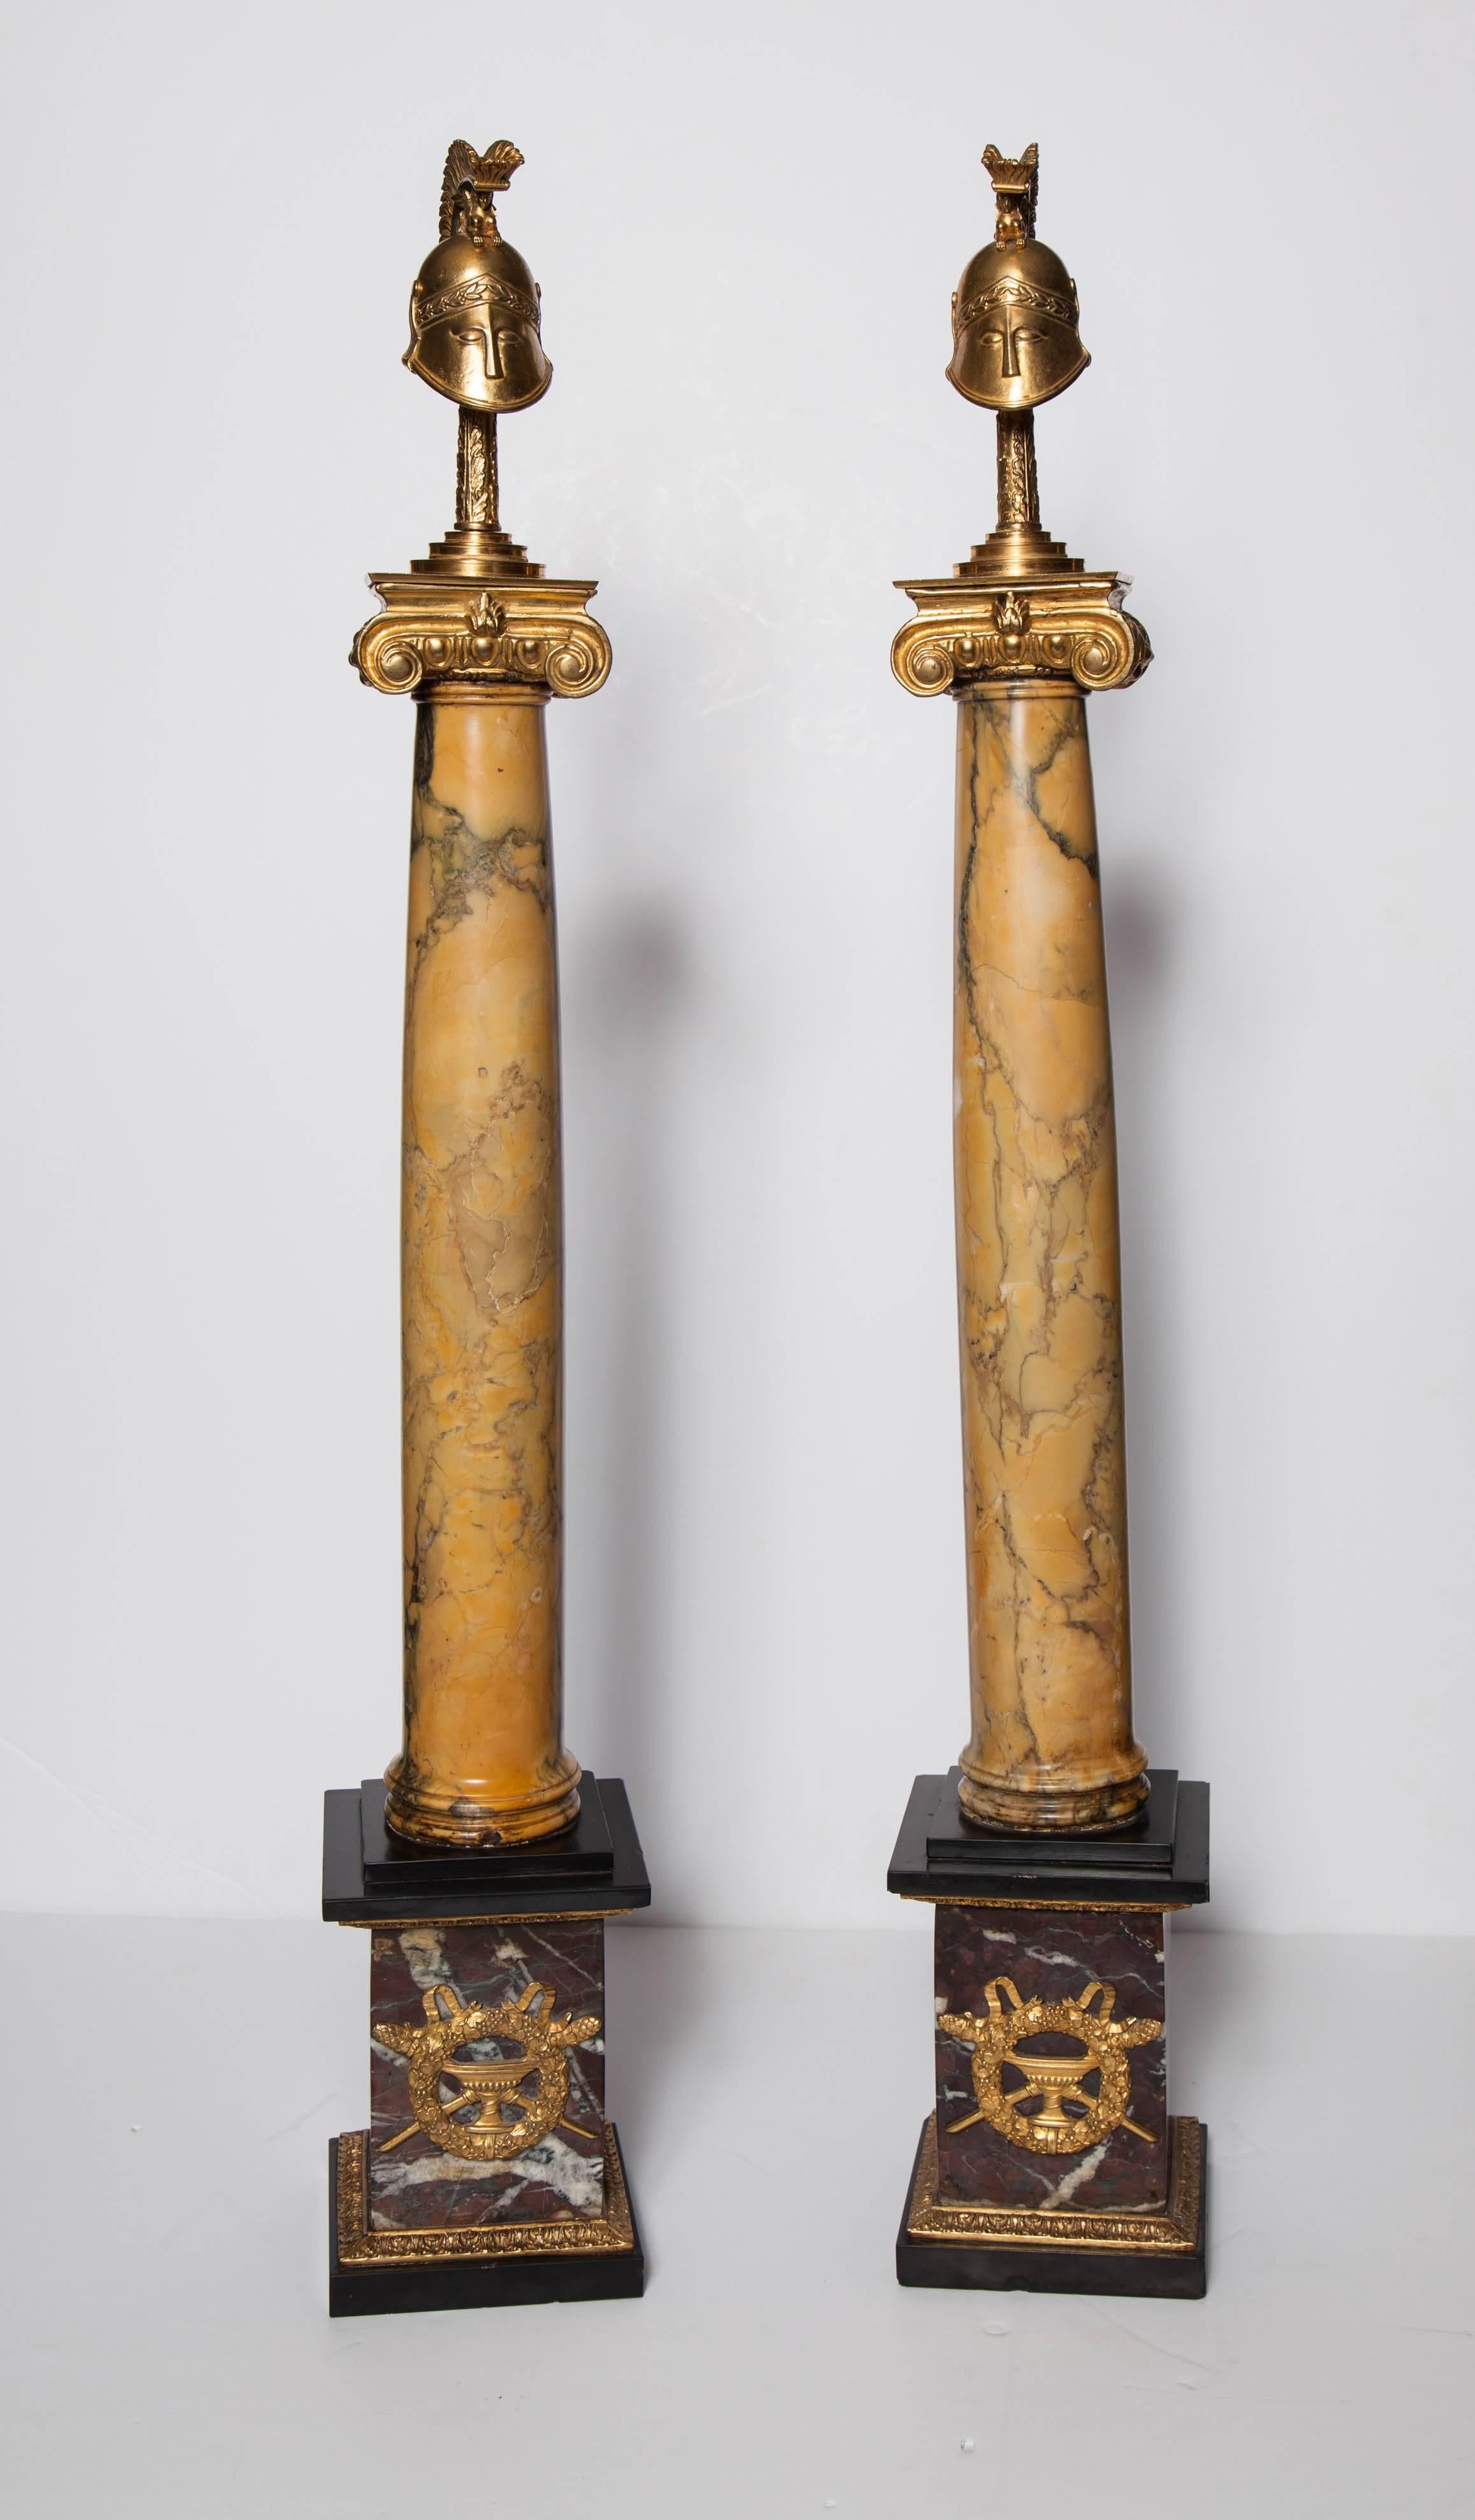 A very unusual and quite large pair of Antique Russian Dore Bronze, Sienna marble and Jasper, Neoclassical style, Military Helmet (Trophy) form standing Obelisks. Each ormolu Helmet sitting on a Roman Corinthian column,
Russian circa mid 1800's
H: